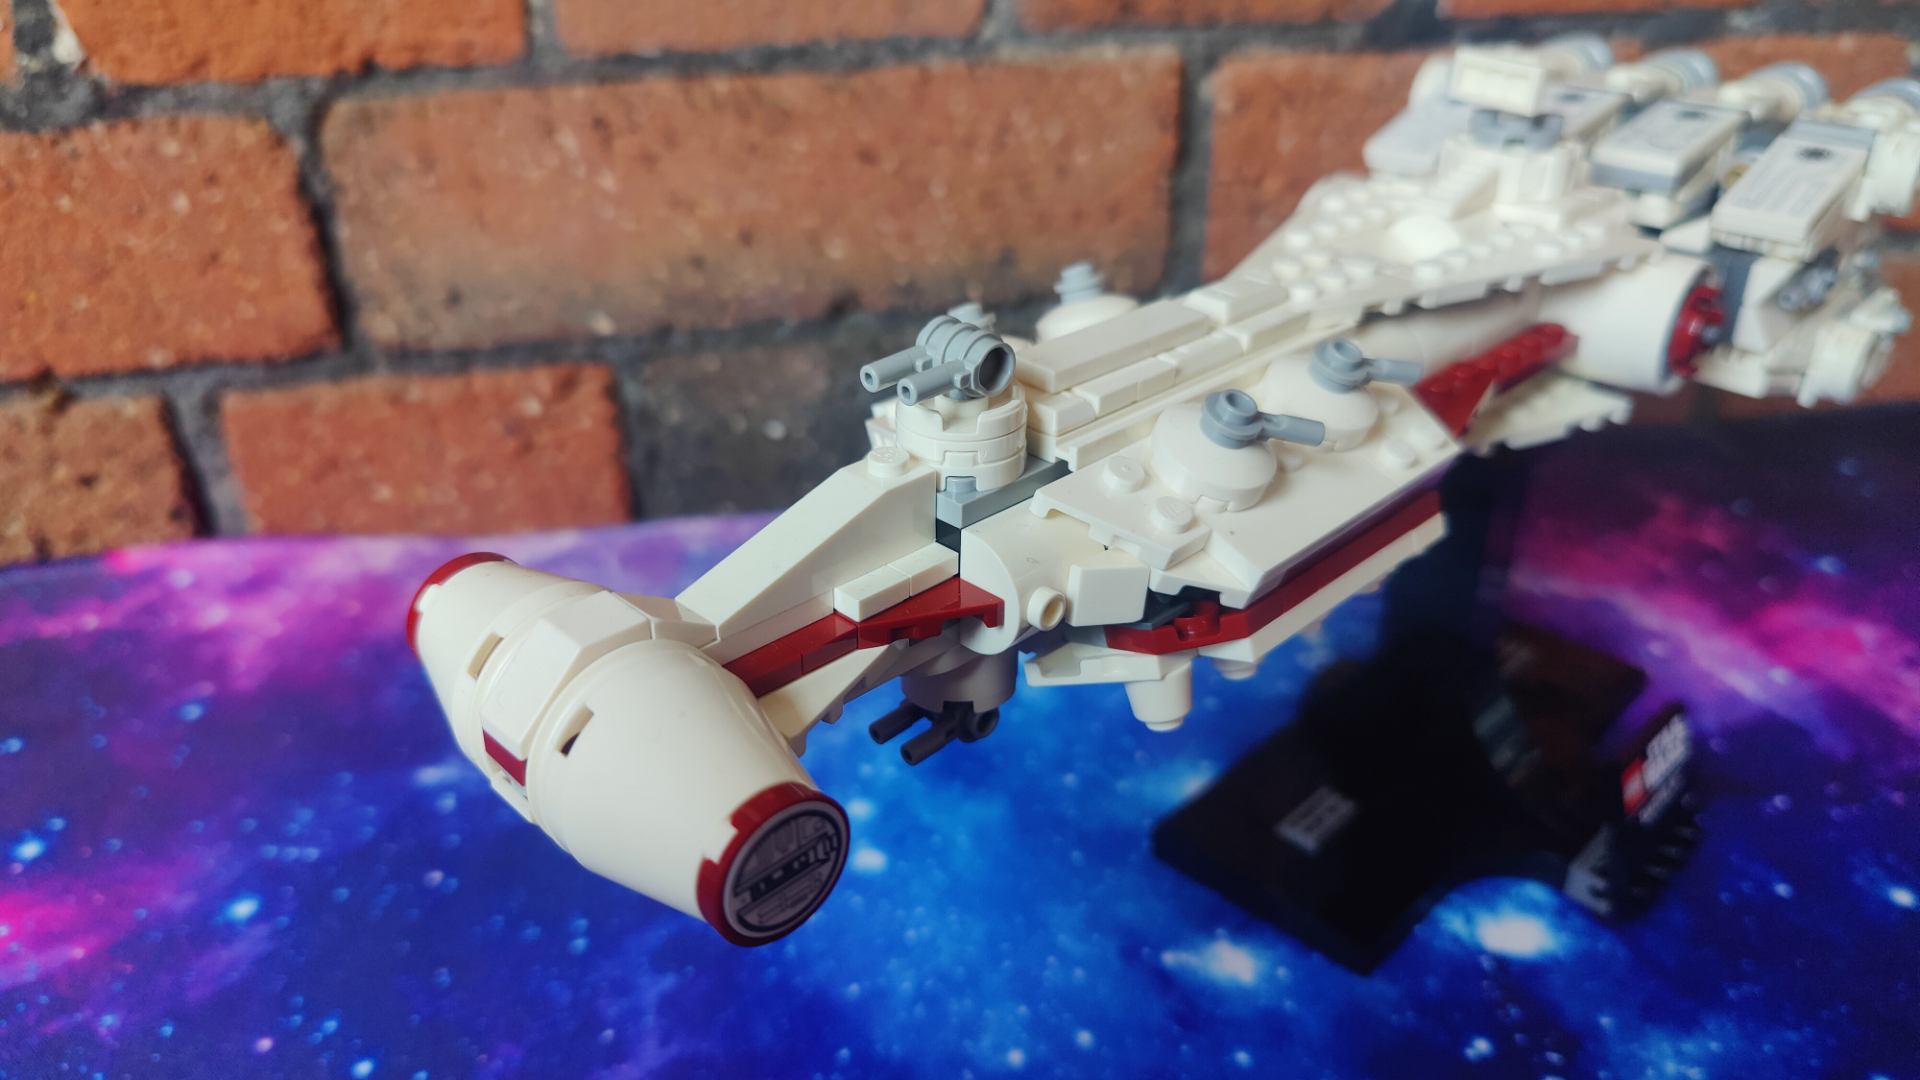 Lego Tantive IV front, seen up close